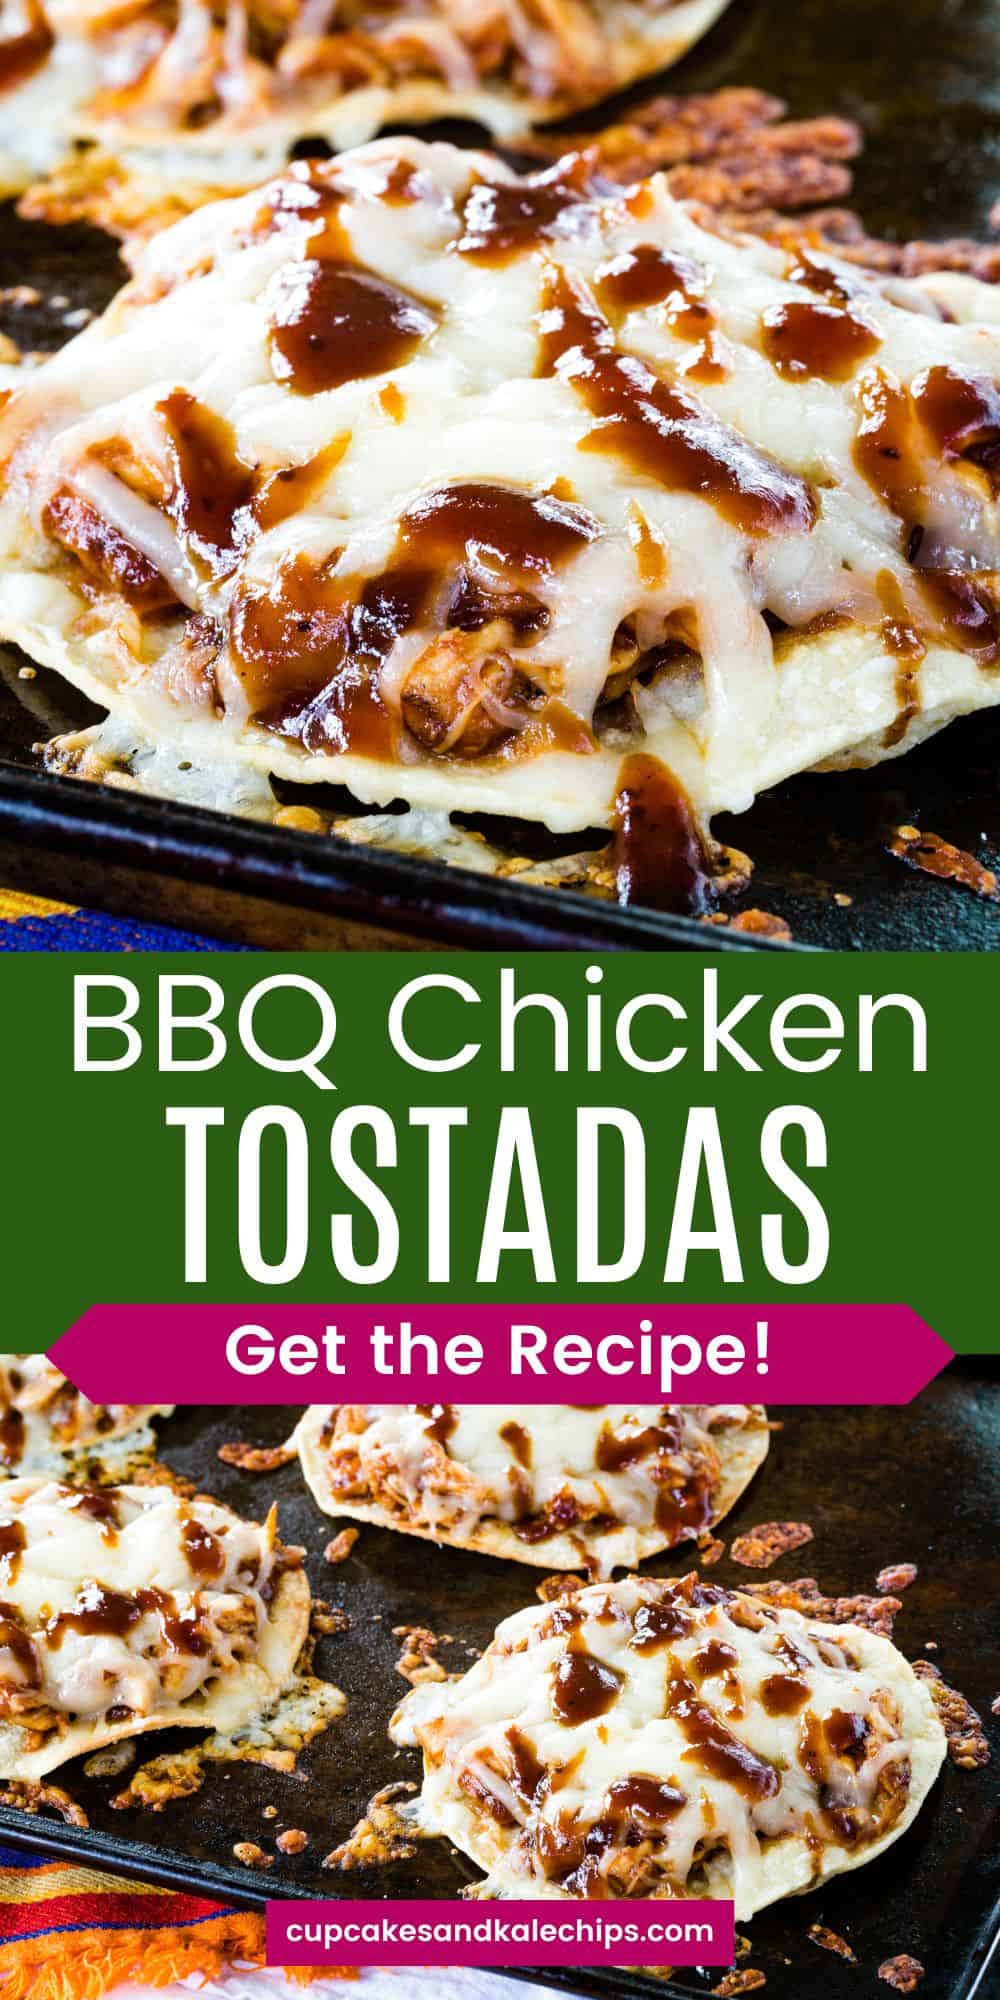 Quick & Easy BBQ Chicken Tostadas | Cupcakes & Kale Chips